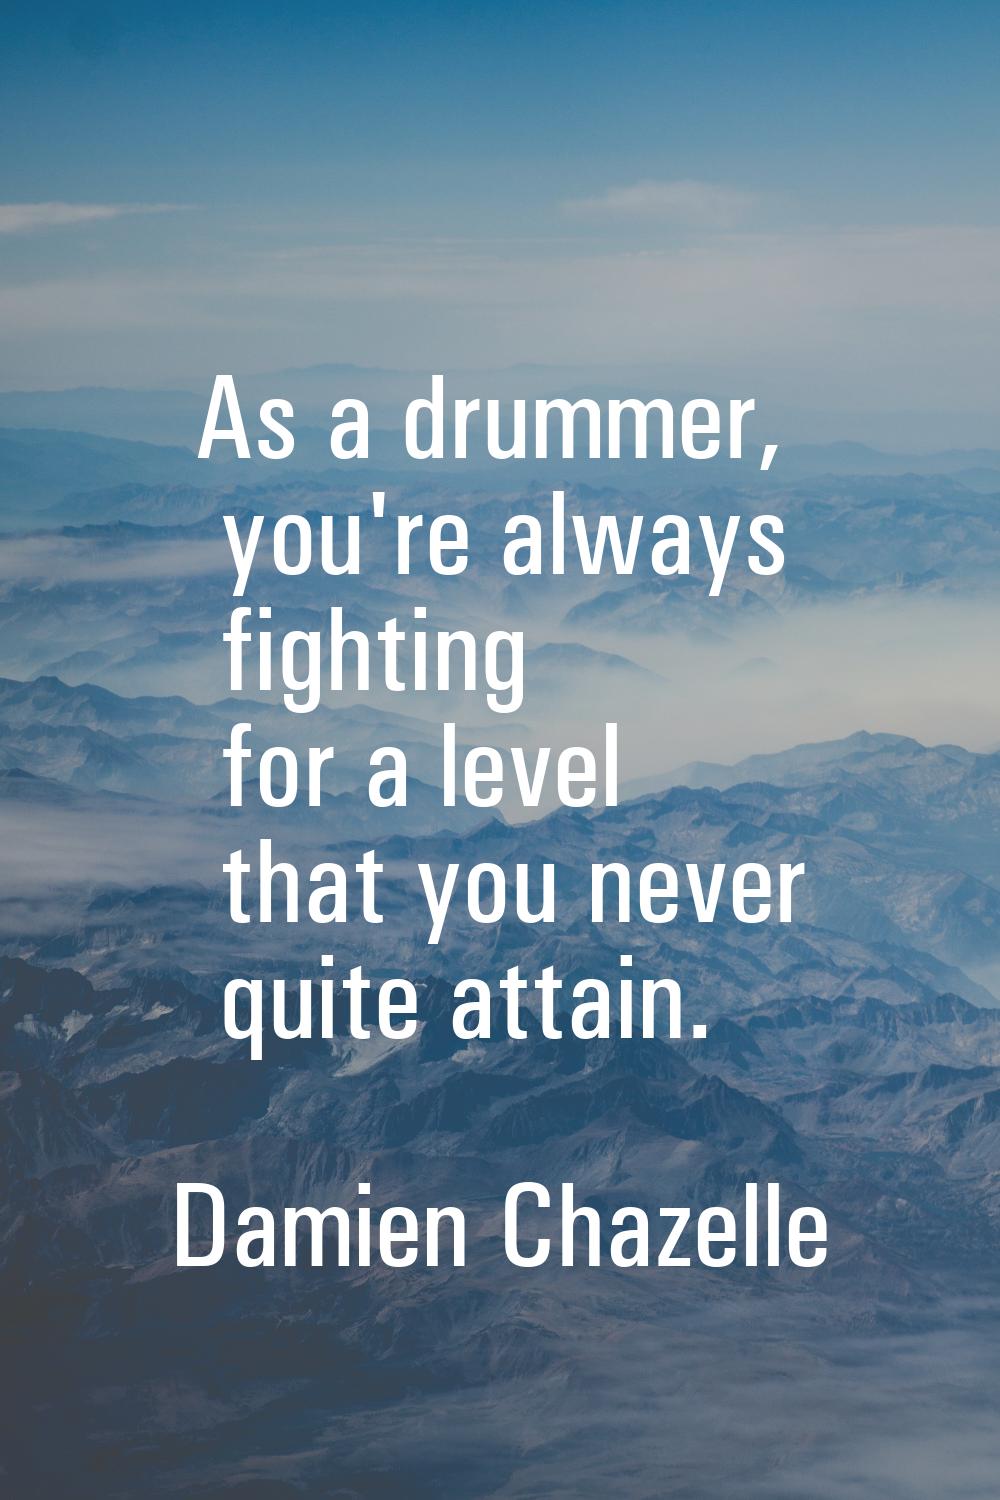 As a drummer, you're always fighting for a level that you never quite attain.